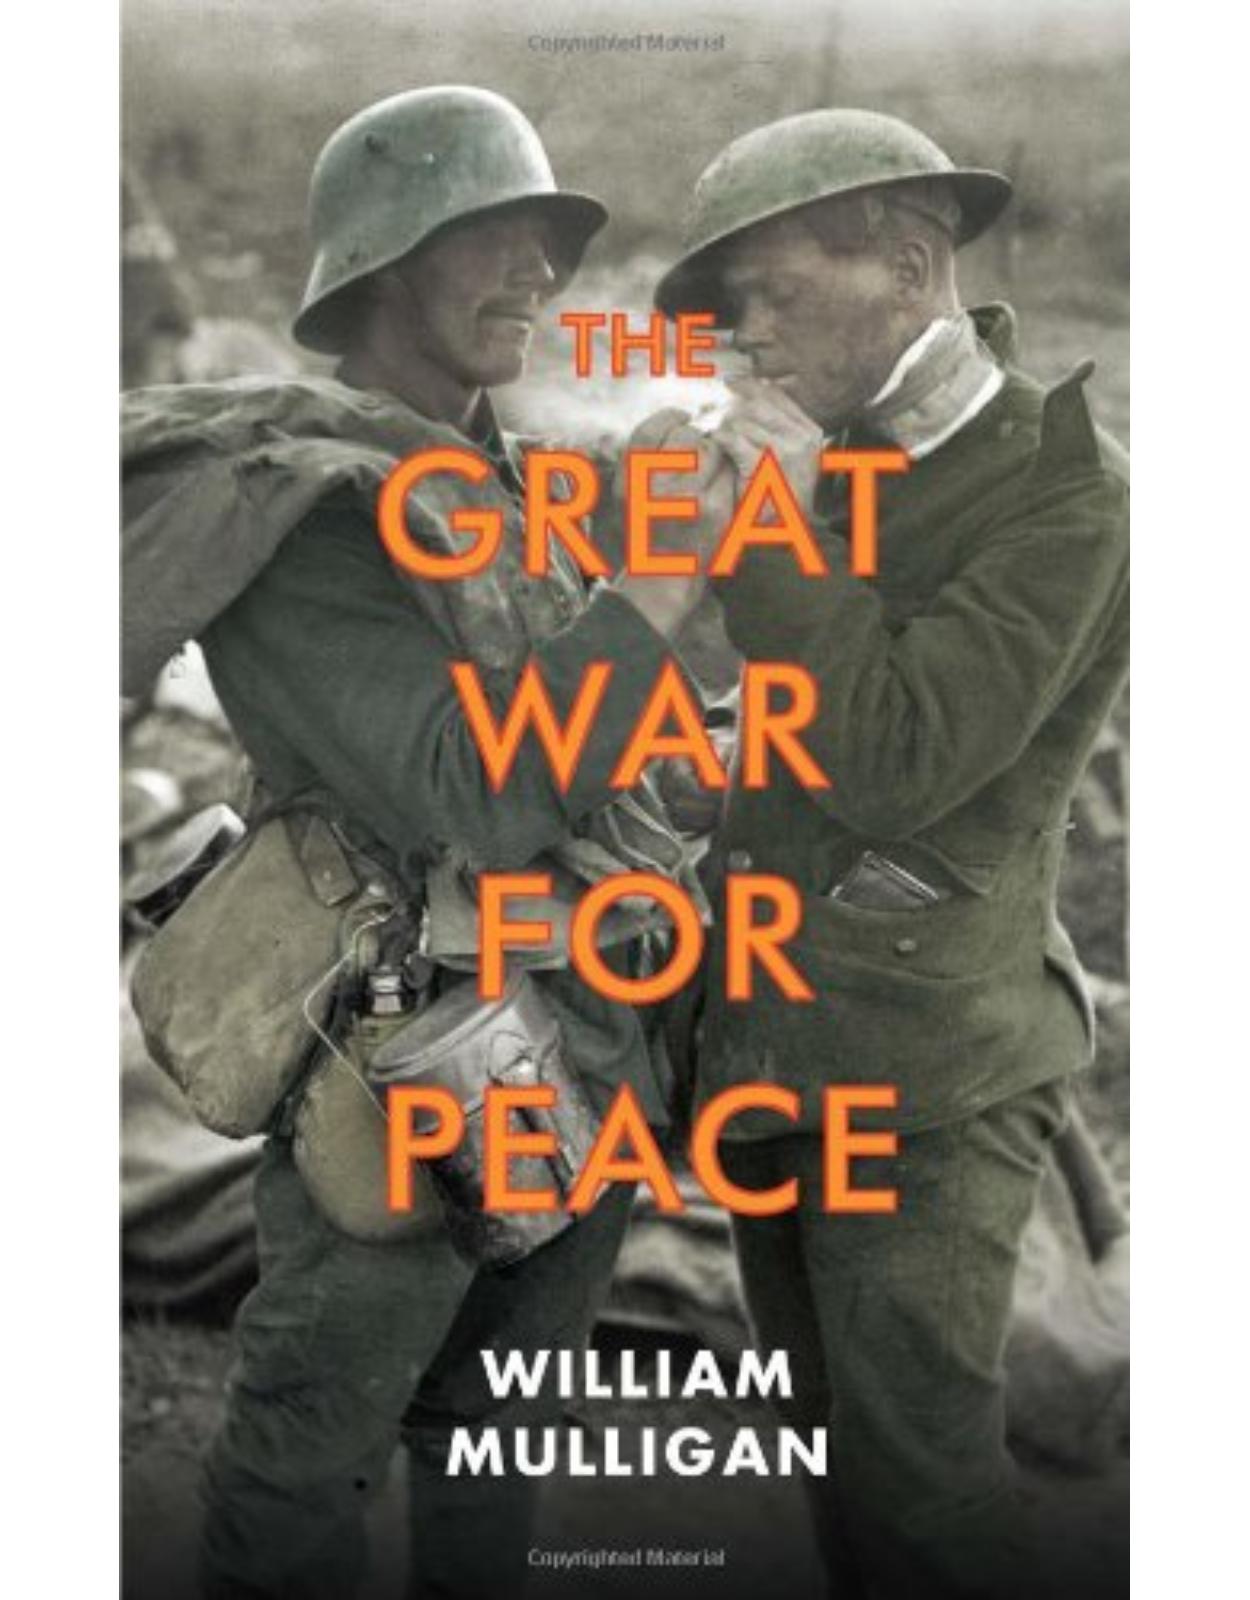 Great War for Peace.